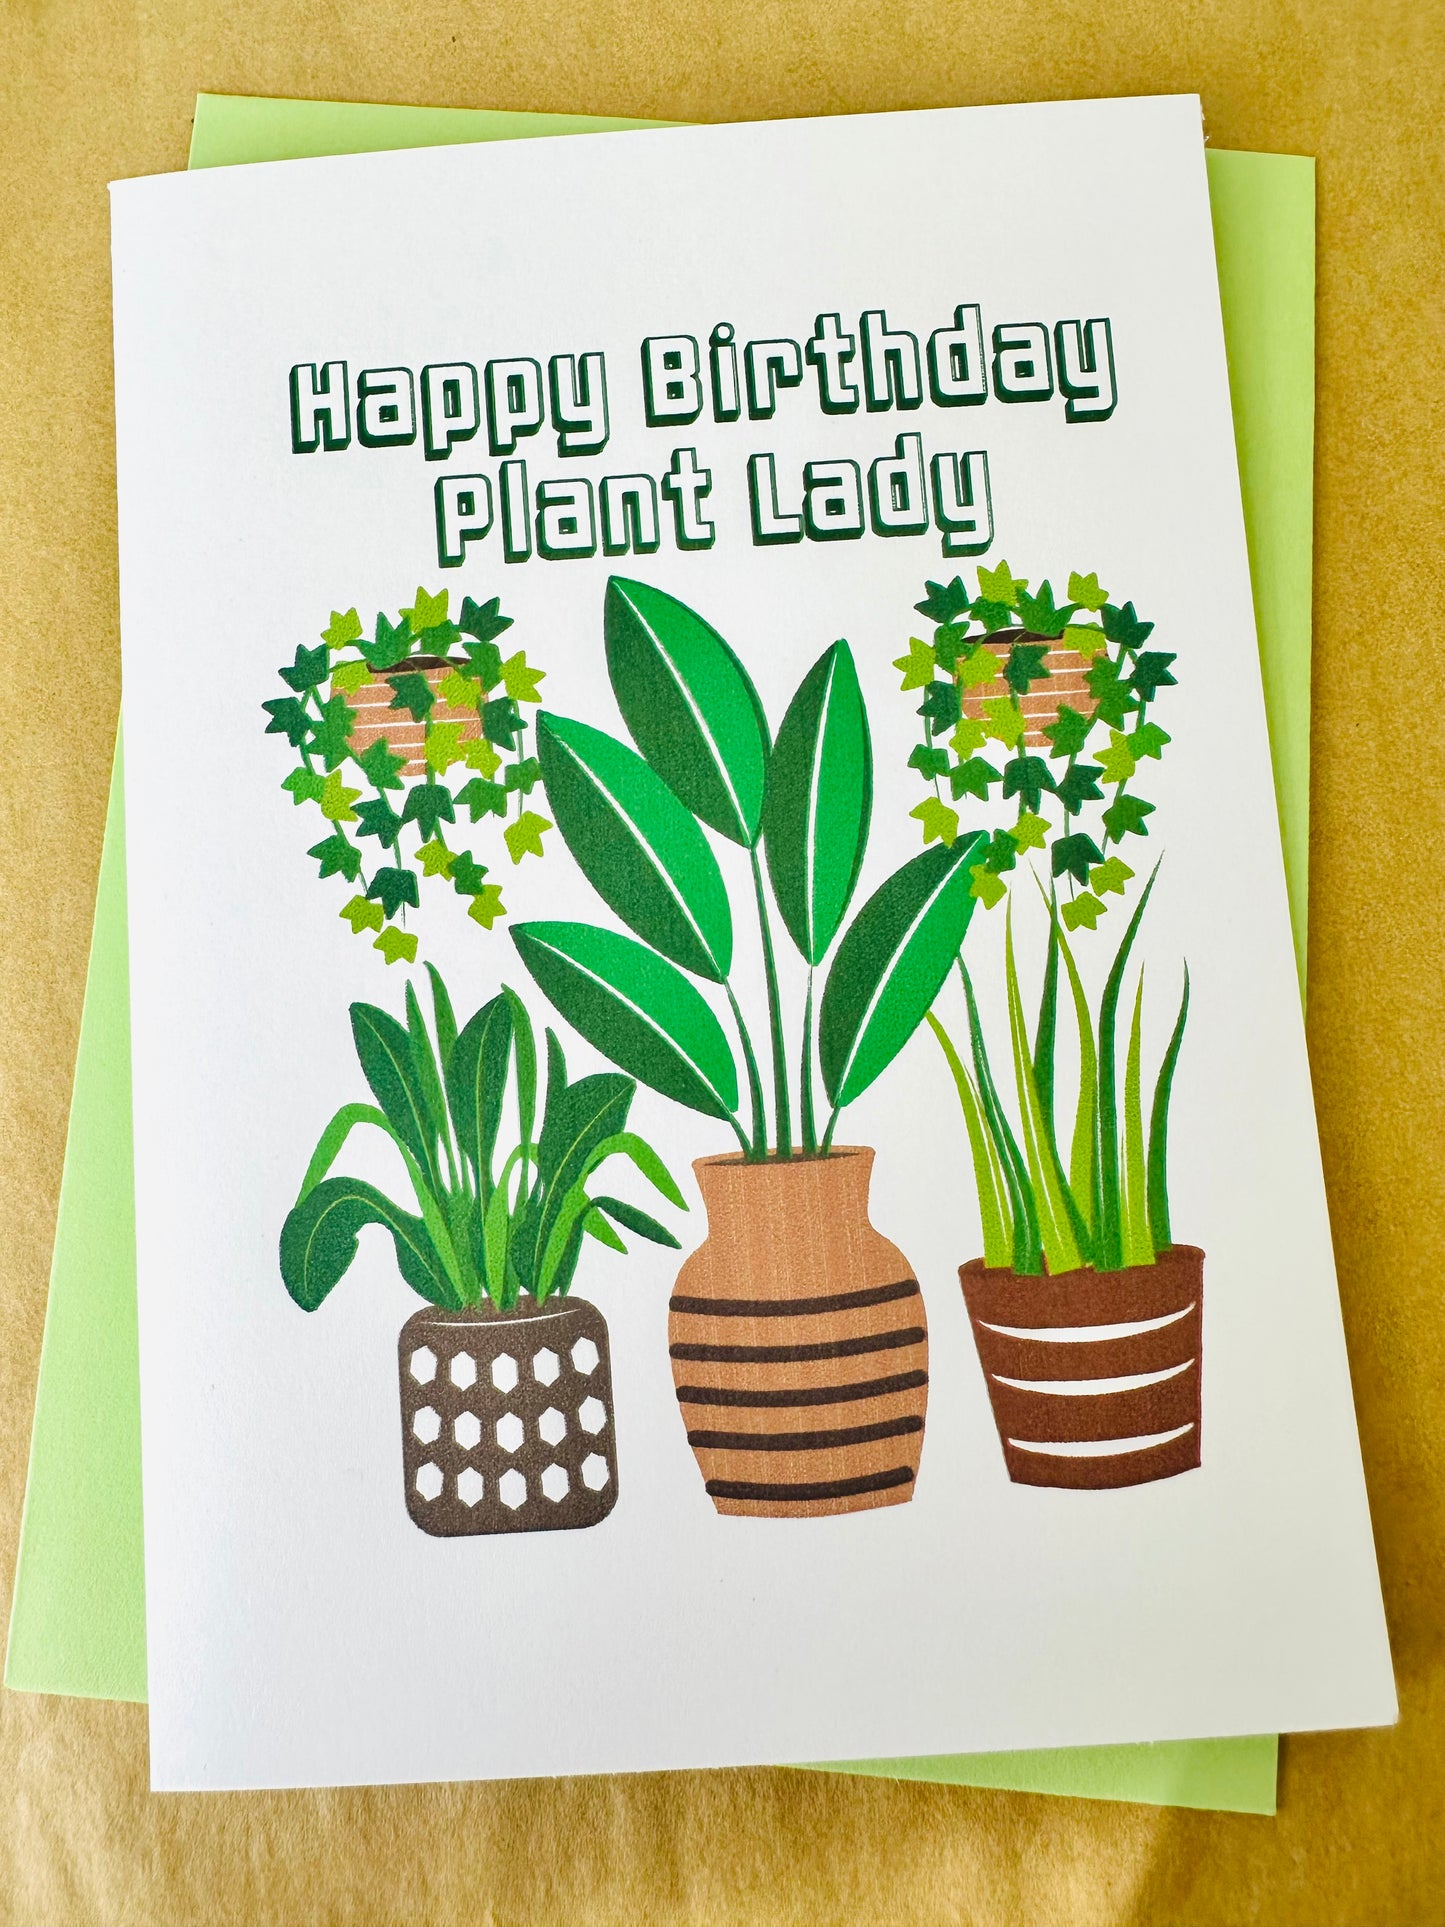 Happy Birthday Plant Lady! 5x7 Plant Greeting card for those plant people in our lives